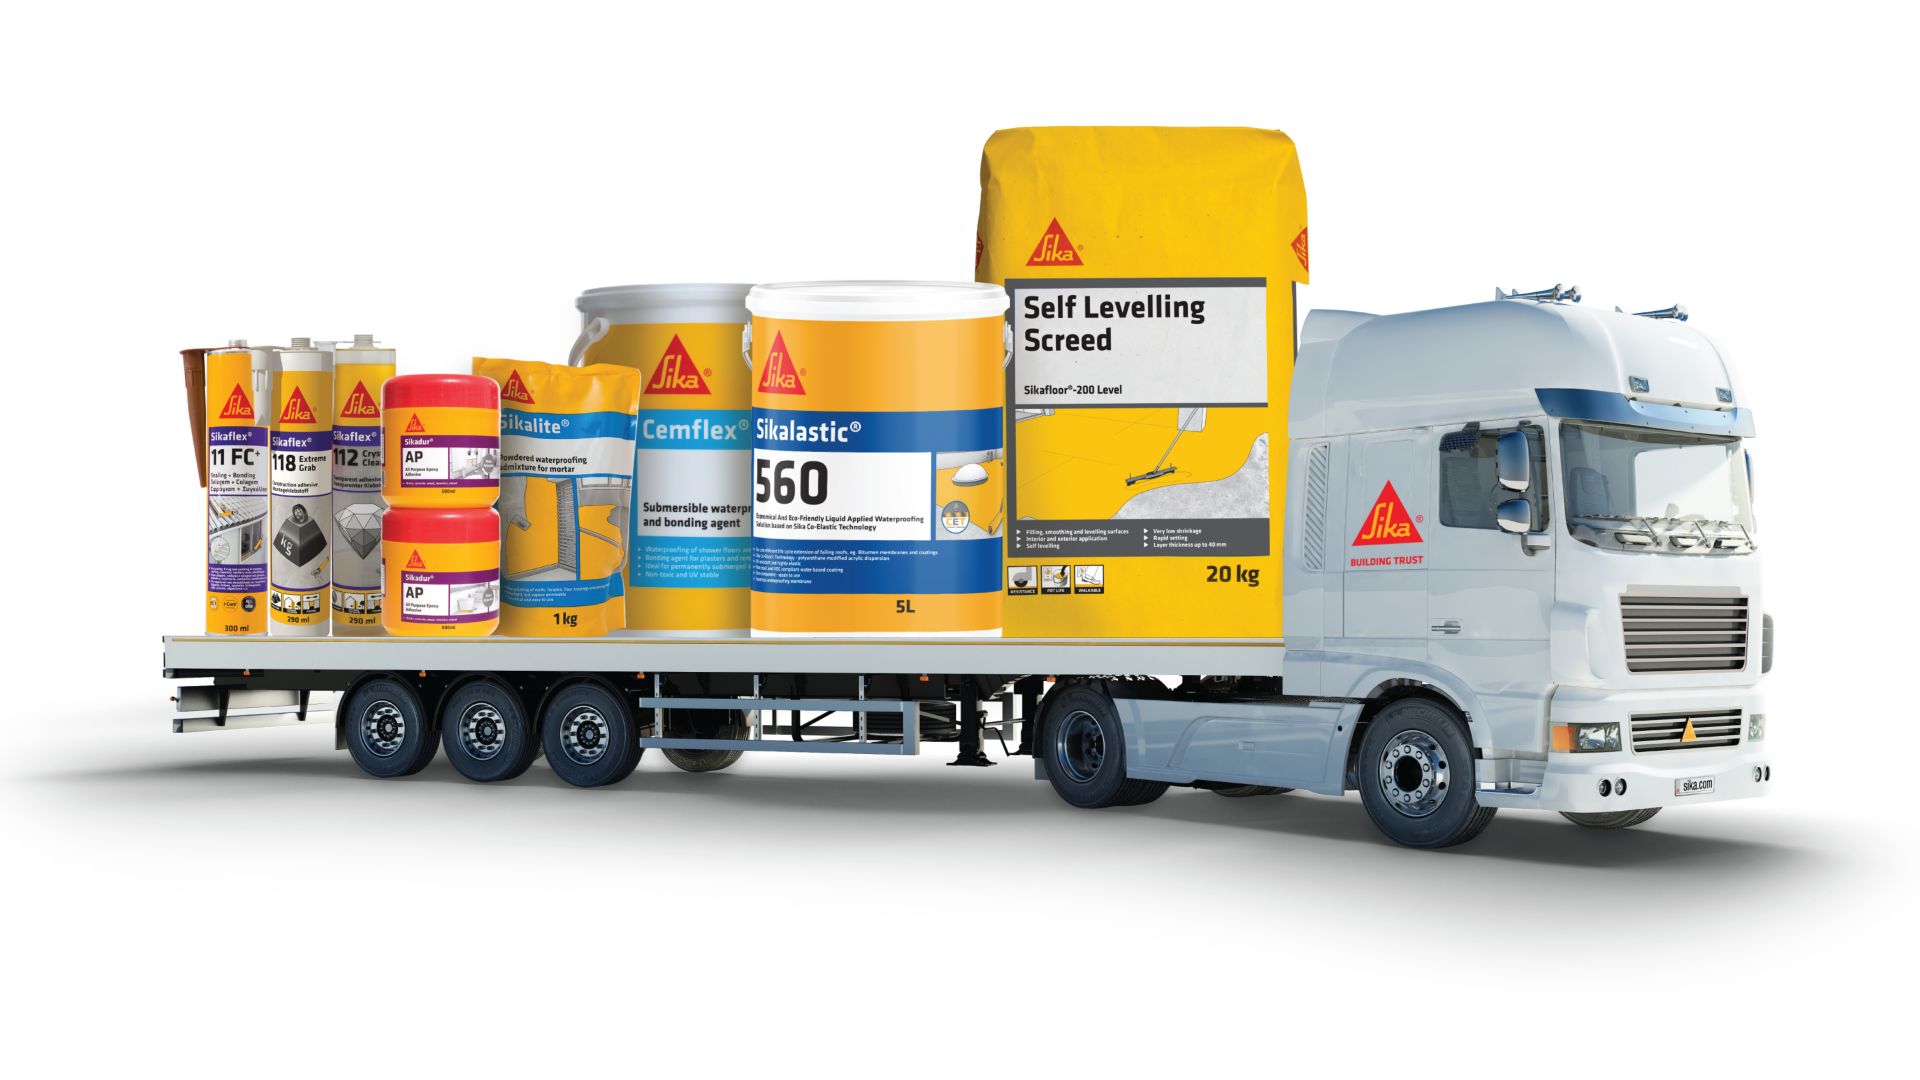 Sika truck packed with products for DIY use